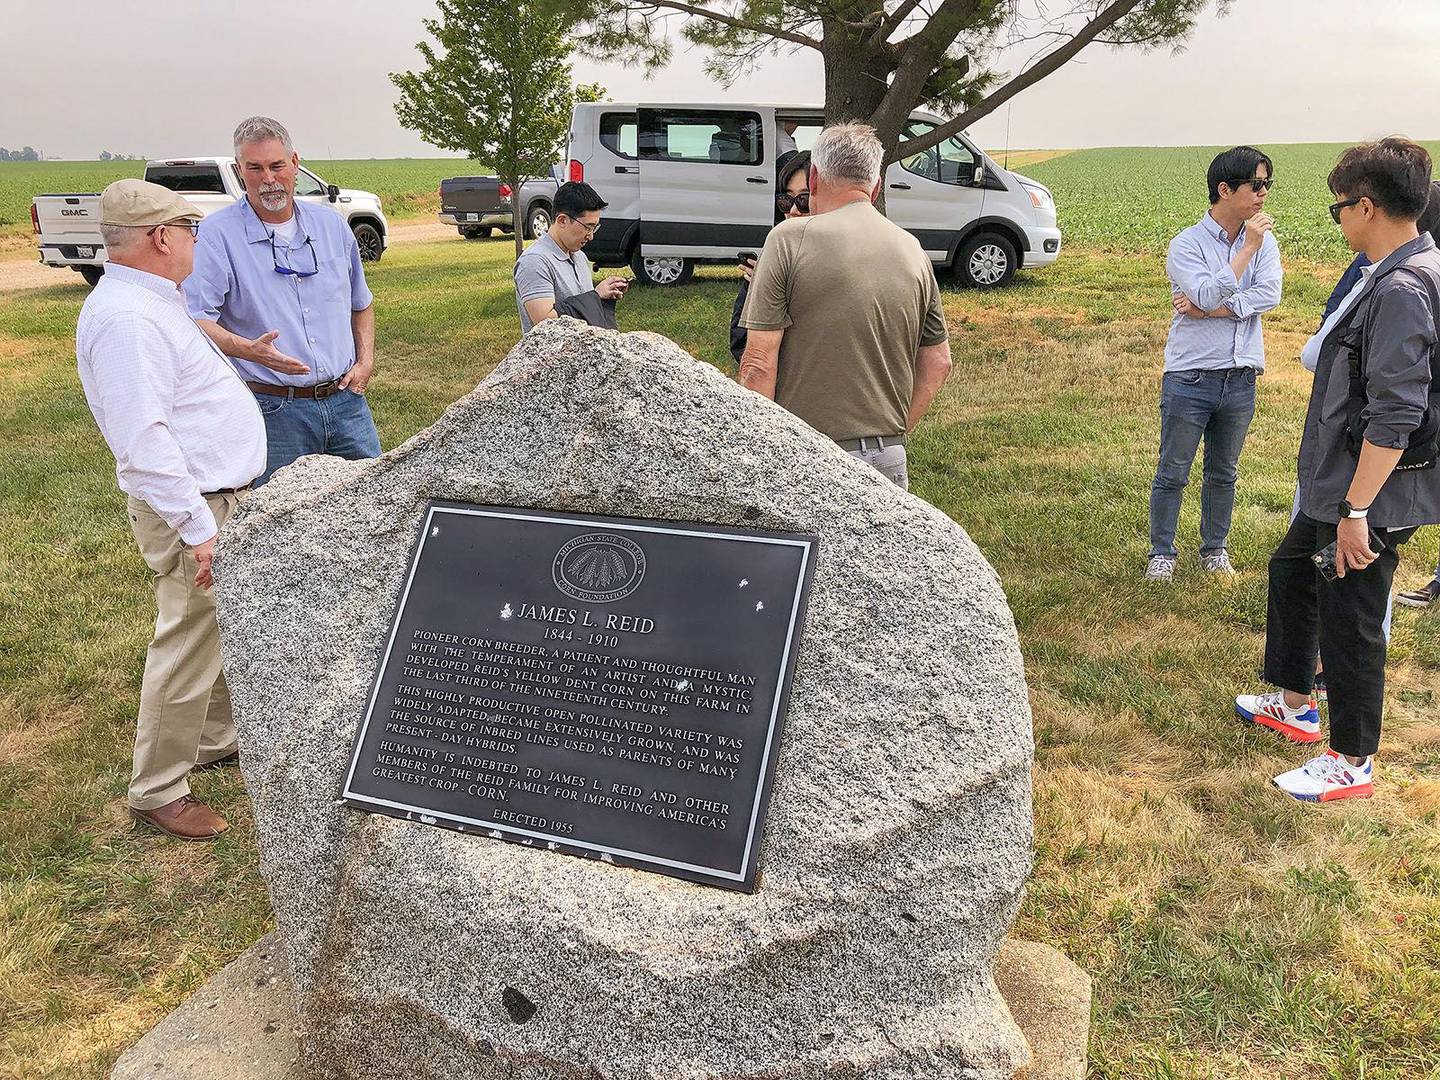 Delavan natives Guy Allen (left), Kansas State University ag economist, and Matt Shipton (second from left), a seed industry representative, discuss the significance of a historical marker at the farm where Reid’s Yellow Dent Corn was developed in the 1800s. A presentation was held on the farm as part of K-State’s Grain Export and Supply Chain Expedition, hosted by Allen, that brought grain buyers from South Korea through Illinois.